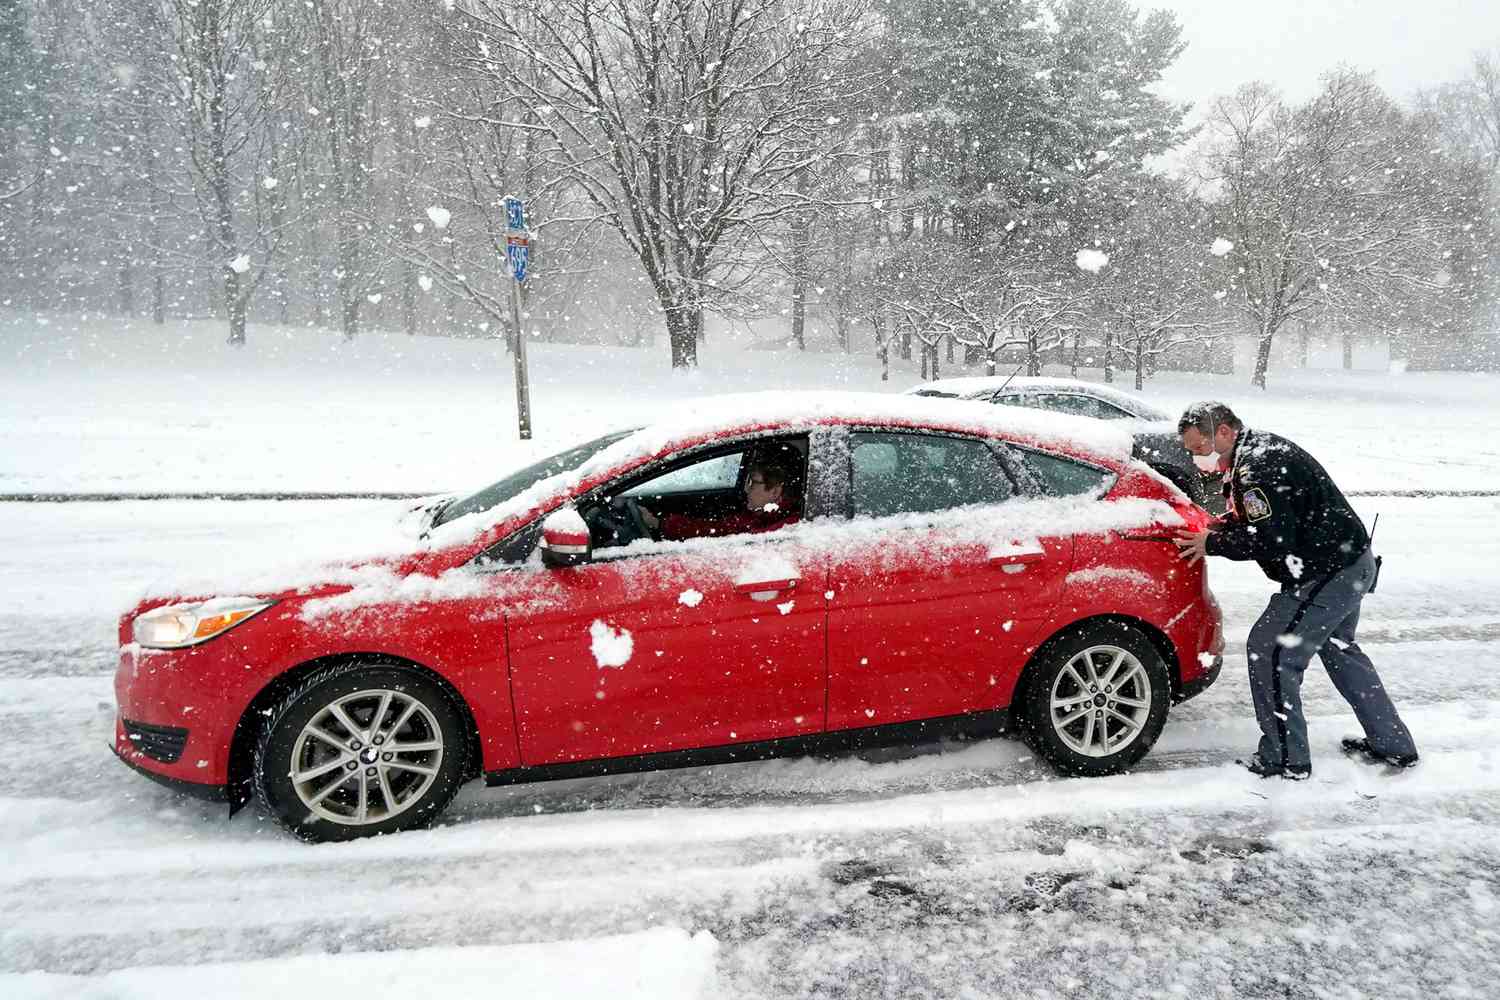 Baltimore County Police Capt. Joseph Conger, right, helps a motorist push up a steep hill during a snowstorm, in Towson, Md